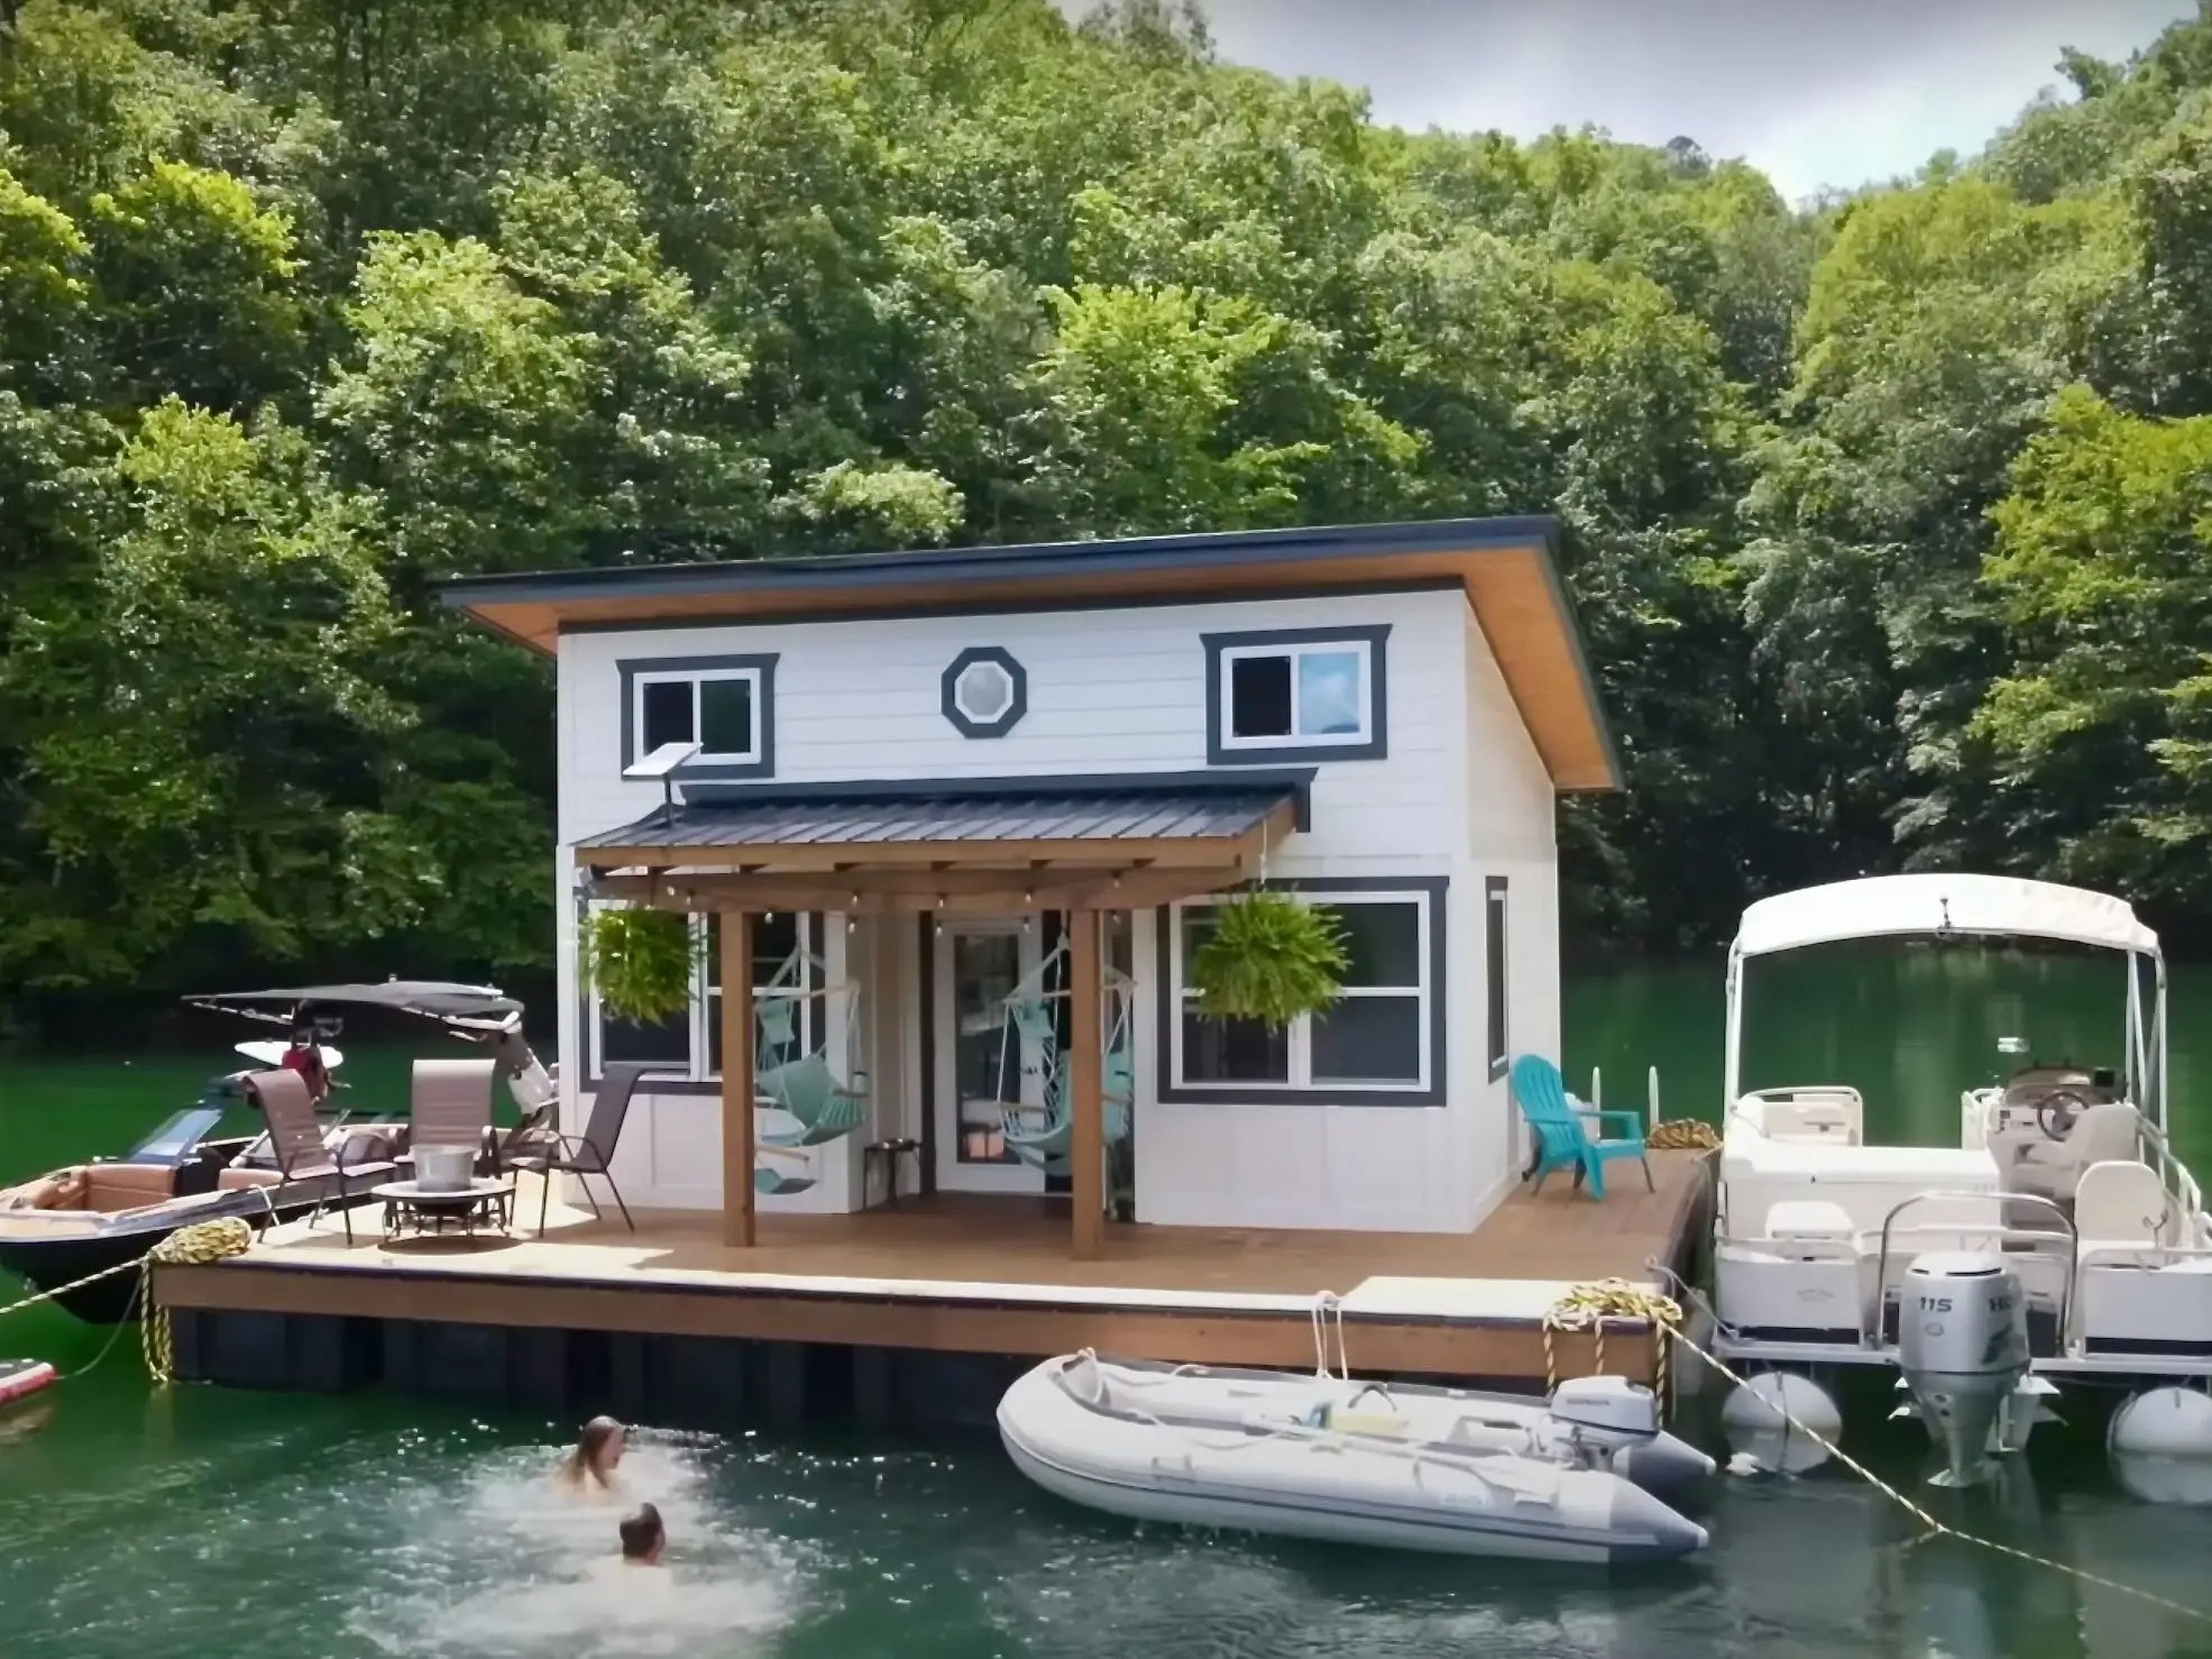 The couple's floating home.